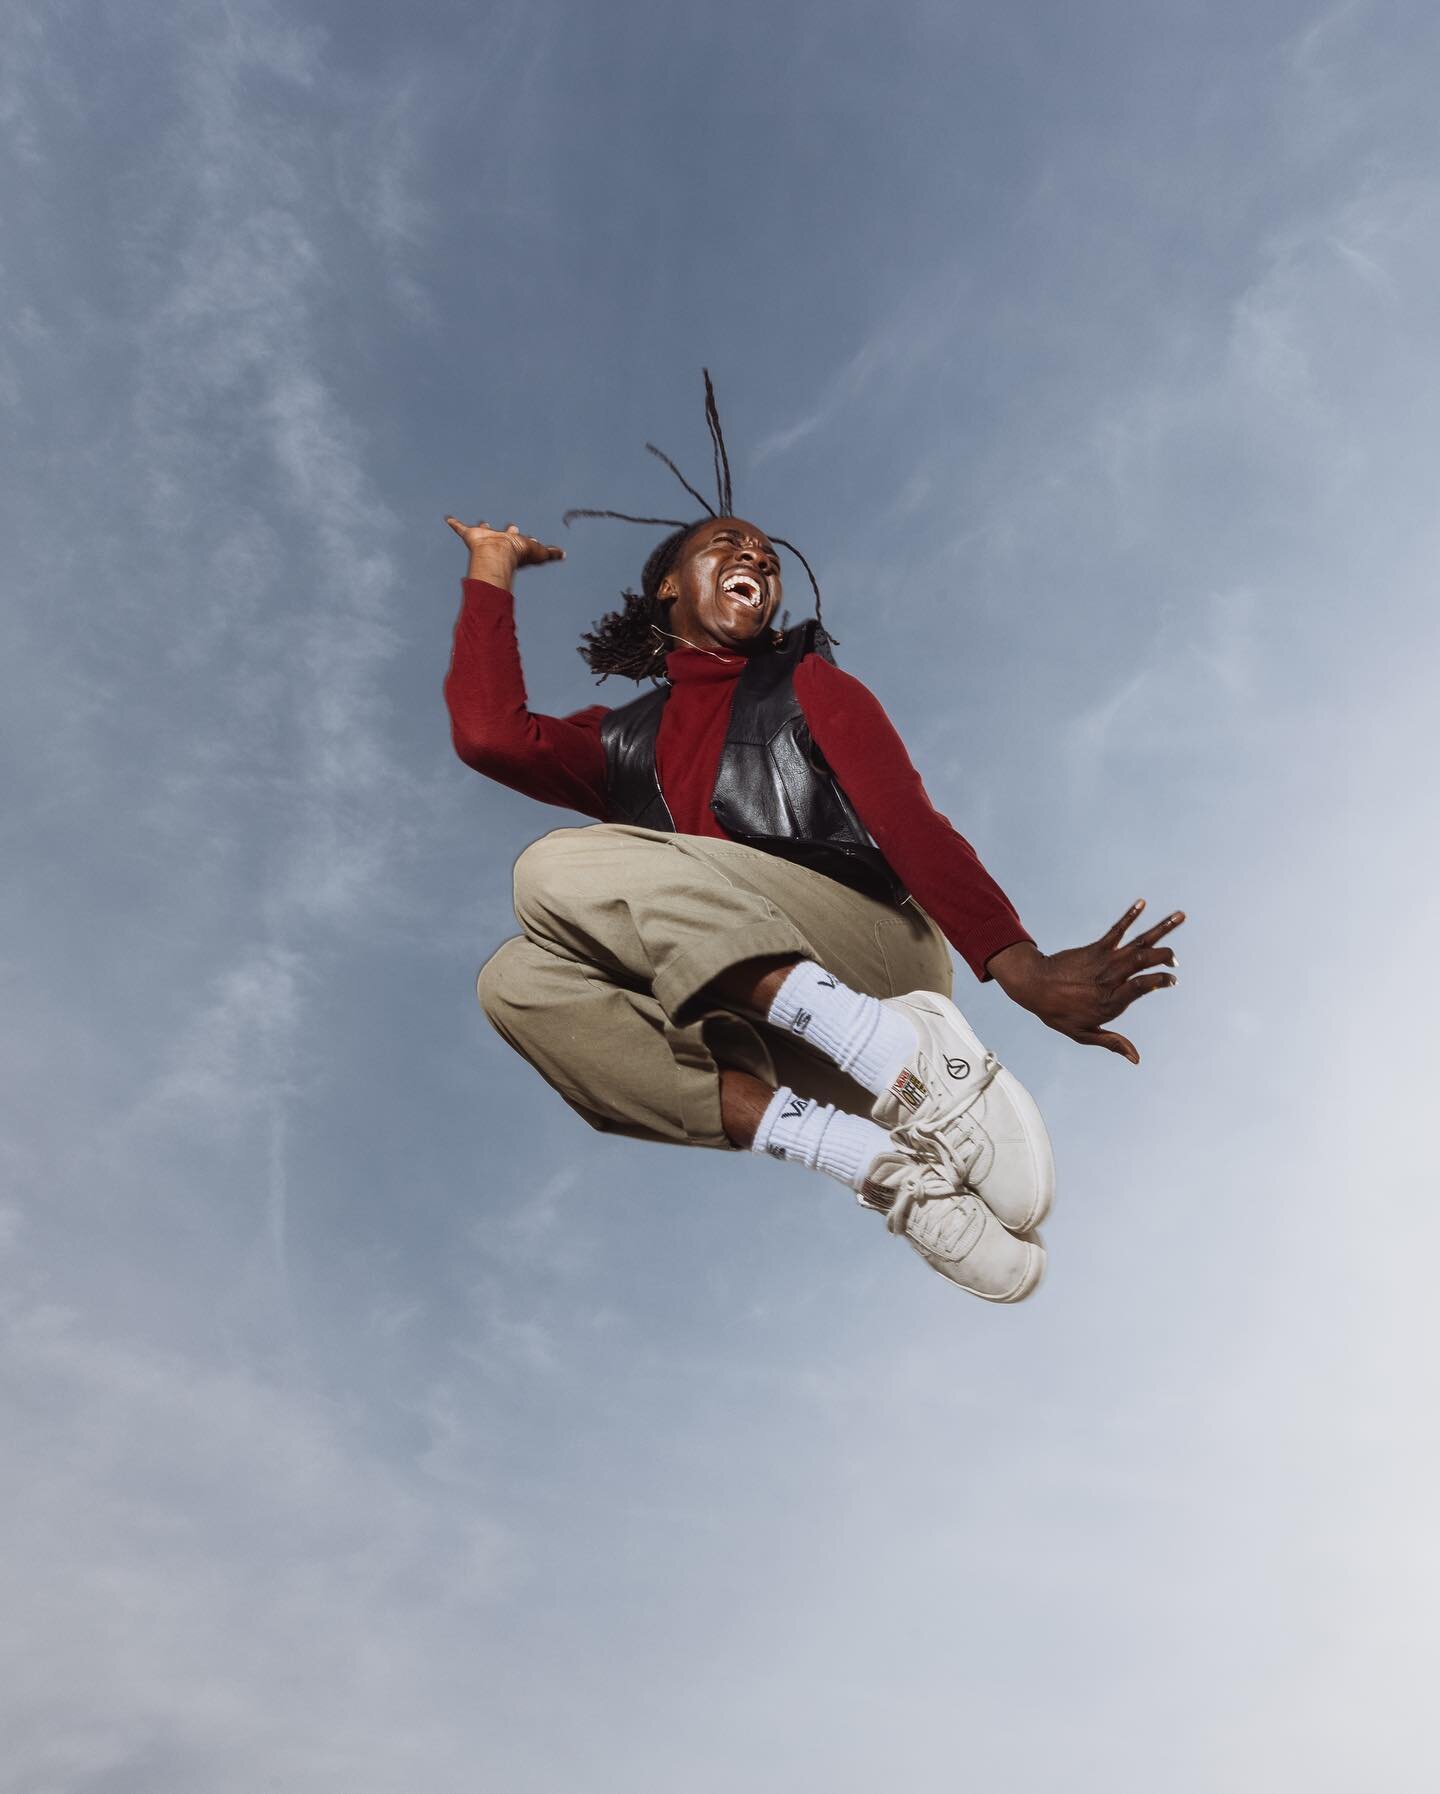 Fly high with @ricwilsonisme, LIVE on WECB&rsquo;s YouTube Sunday, April 18 at 8 PM EST! With special opener @spacecade7s ! 

ALT TEXT:

1st image- Ric Wilson (wearing a black vest, red turtleneck sweater, cuffed khakis, and white sneakers) smiling as he jumps in the air

2nd image- Close-up of Ric Wilson&rsquo;s face

3rd image- Ric Wilson (wearing same outfit as in first image) looking at camera as he jumps in the air, his arms and legs both extended out and wide